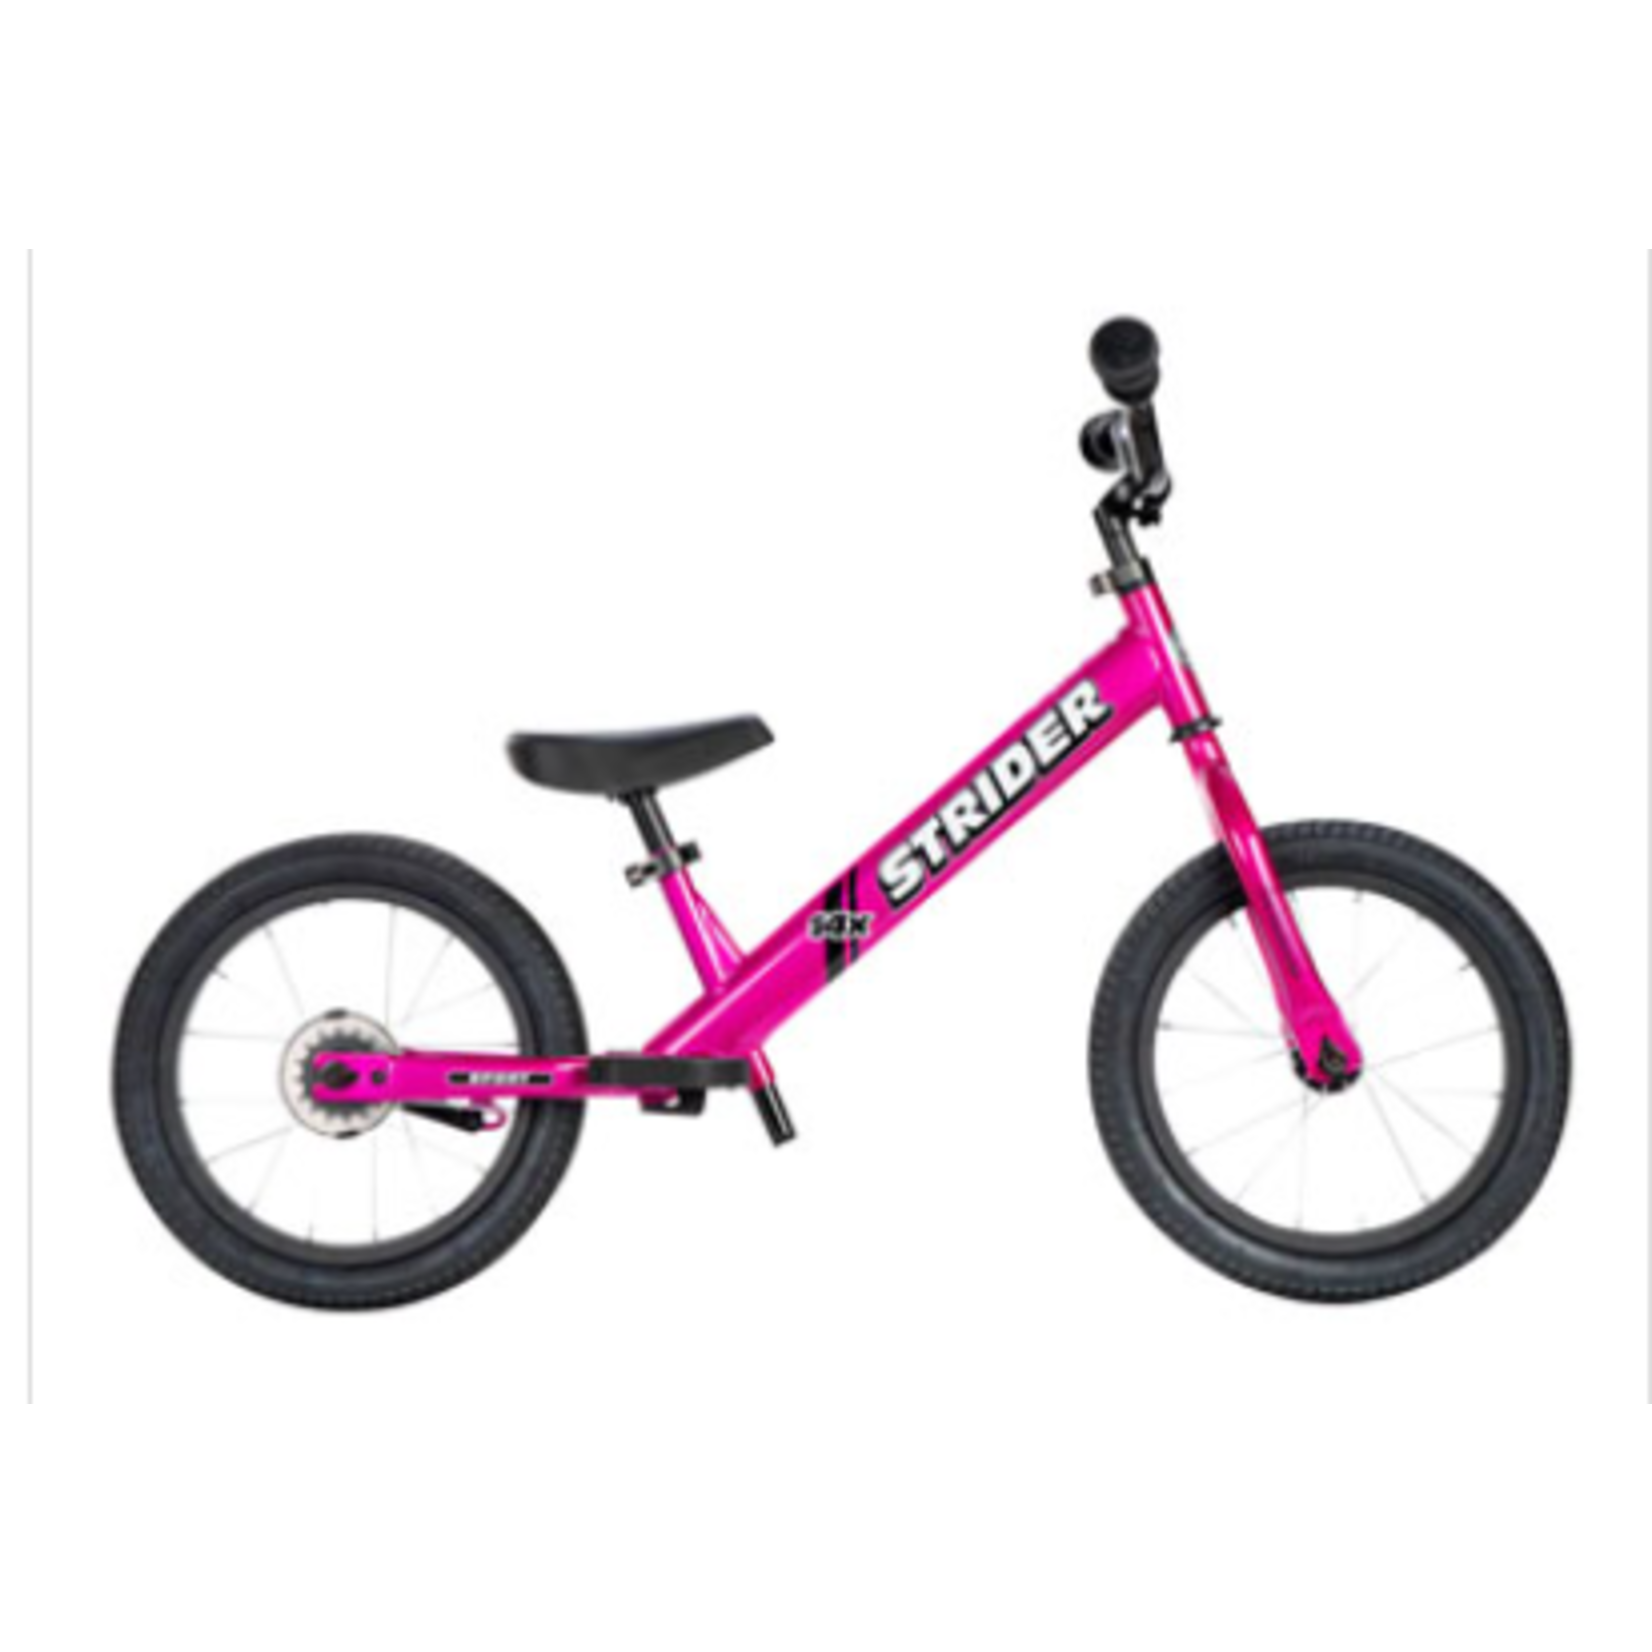 STRIDER SPORT14" PEDAL-FREE BIKE FUCHSIA (PEDAL KIT NOT INCLUDED)